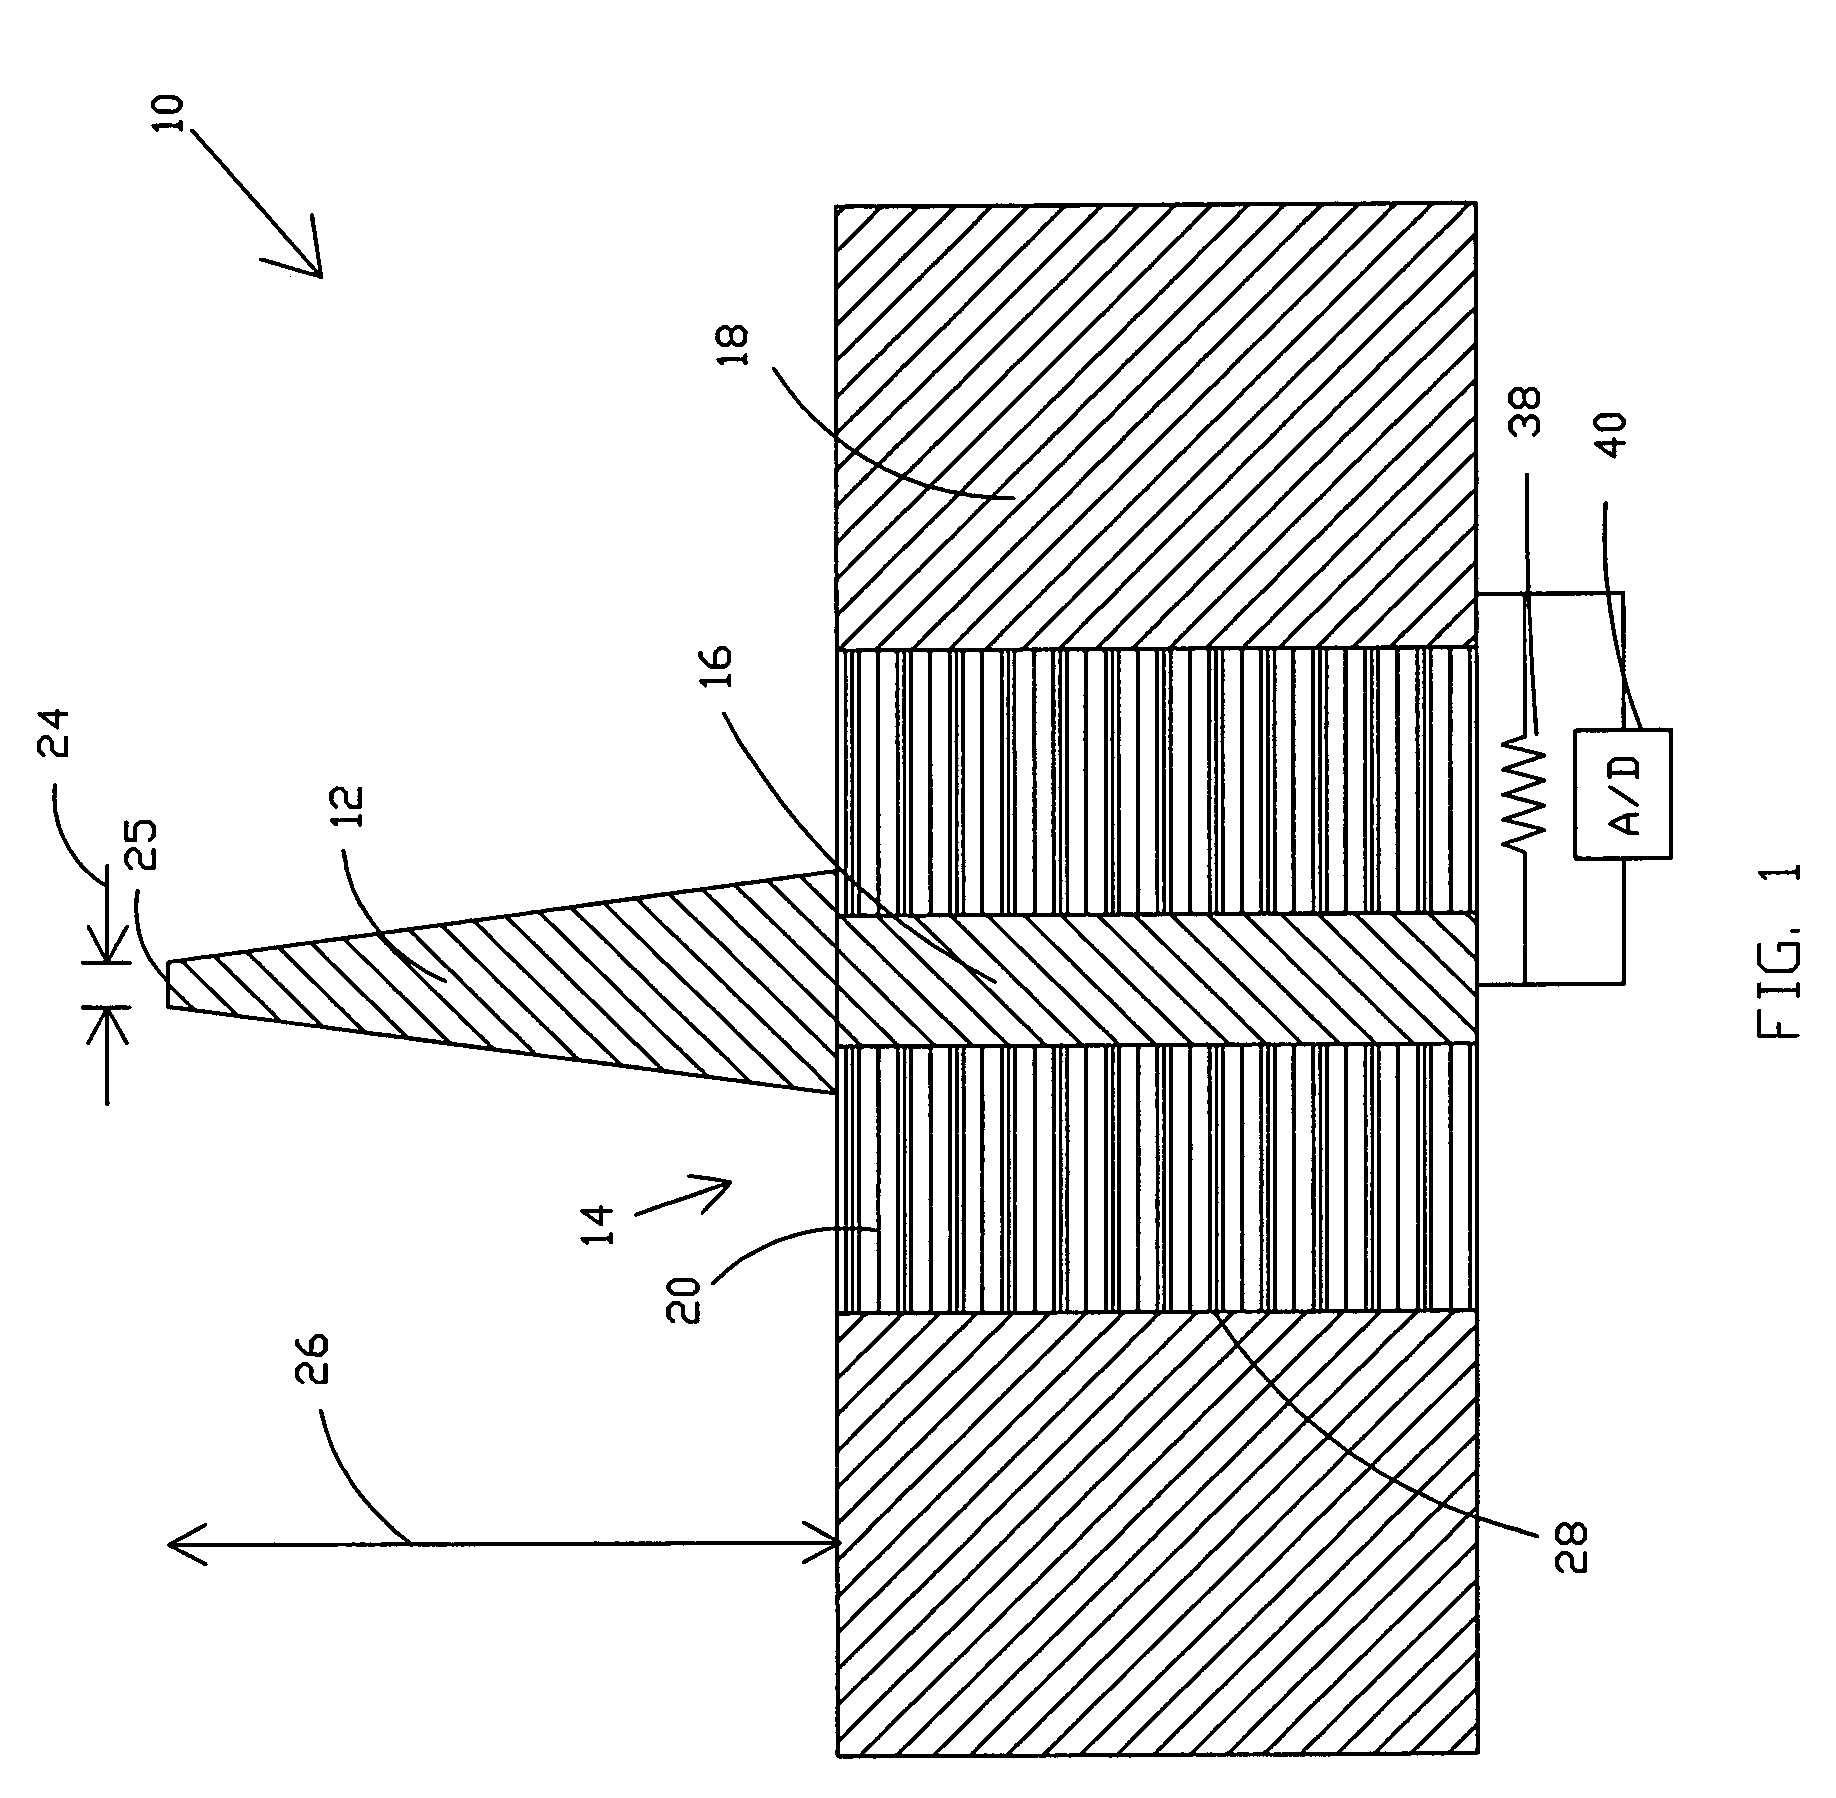 Electromagnetic radiation interface system and method